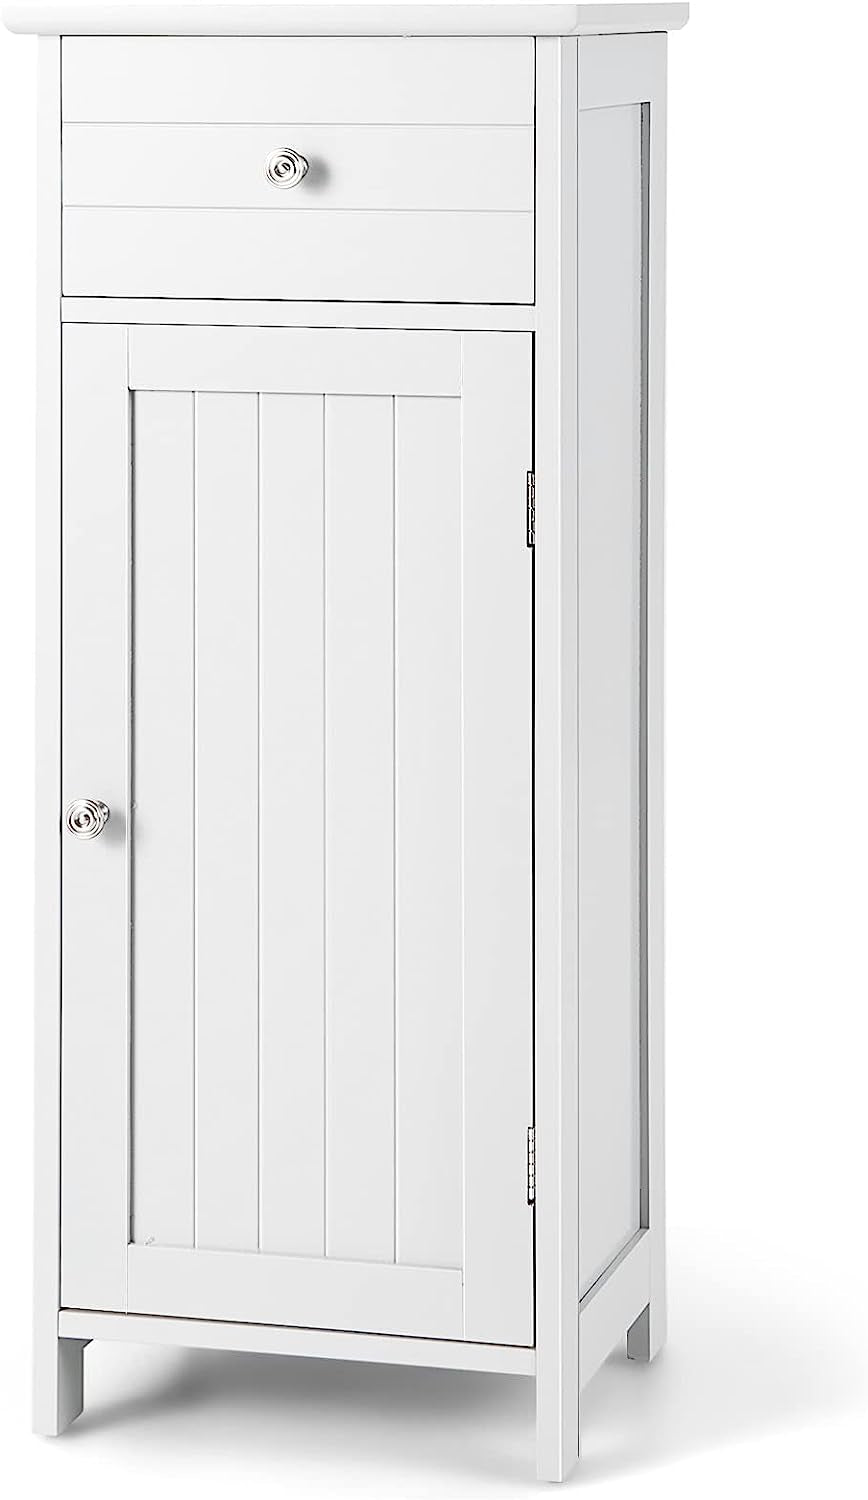 Bathroom Floor Cabinet, Storage Cabinet with Single Door, Pull-Out Drawer, 3-Position Adjustable Shelf, Anti-Topping Device, Side Storage Organizer for Bathroom Living Room Entryway, White